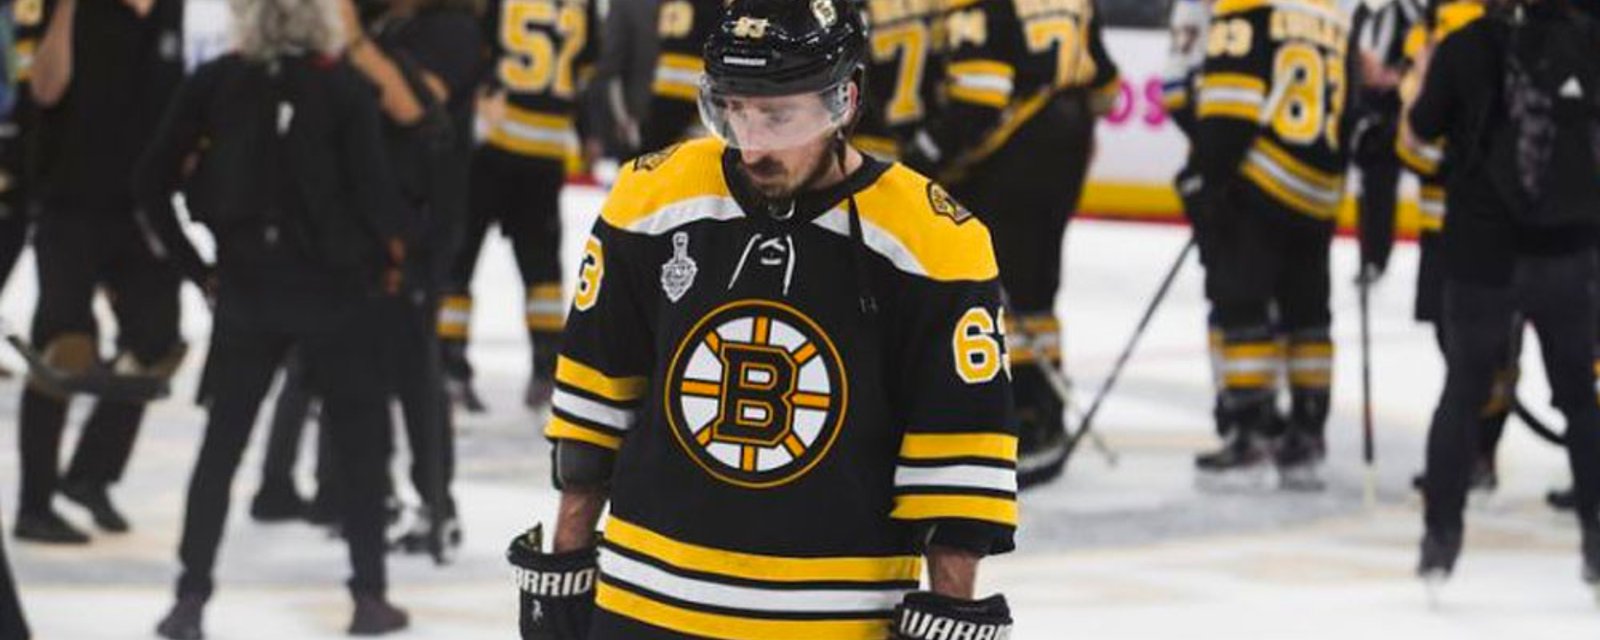 Bruins get pressured to compensate part-time workers 